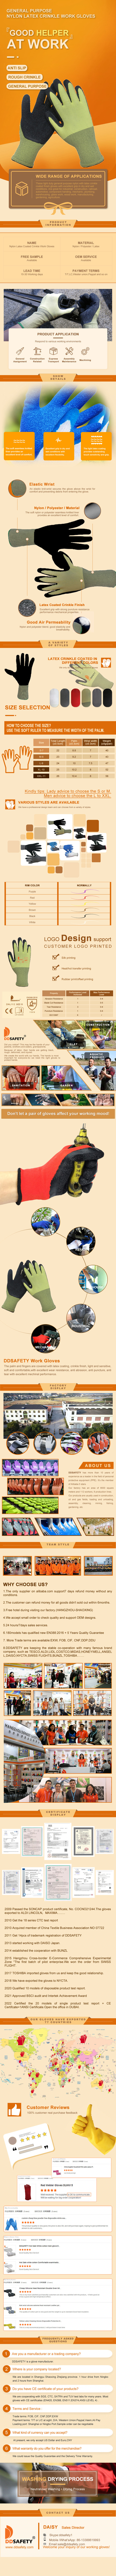 Mens Crinkle Latex Rubber Coated Safety Work Gloves Ce 3121 - DNL112 Mens Crinkle Latex Rubber Coated Safety Work Gloves Ce 3121 - DNL112 gloves,latex coated gloves,mens gloves,latex coated work gloves,safety gloves